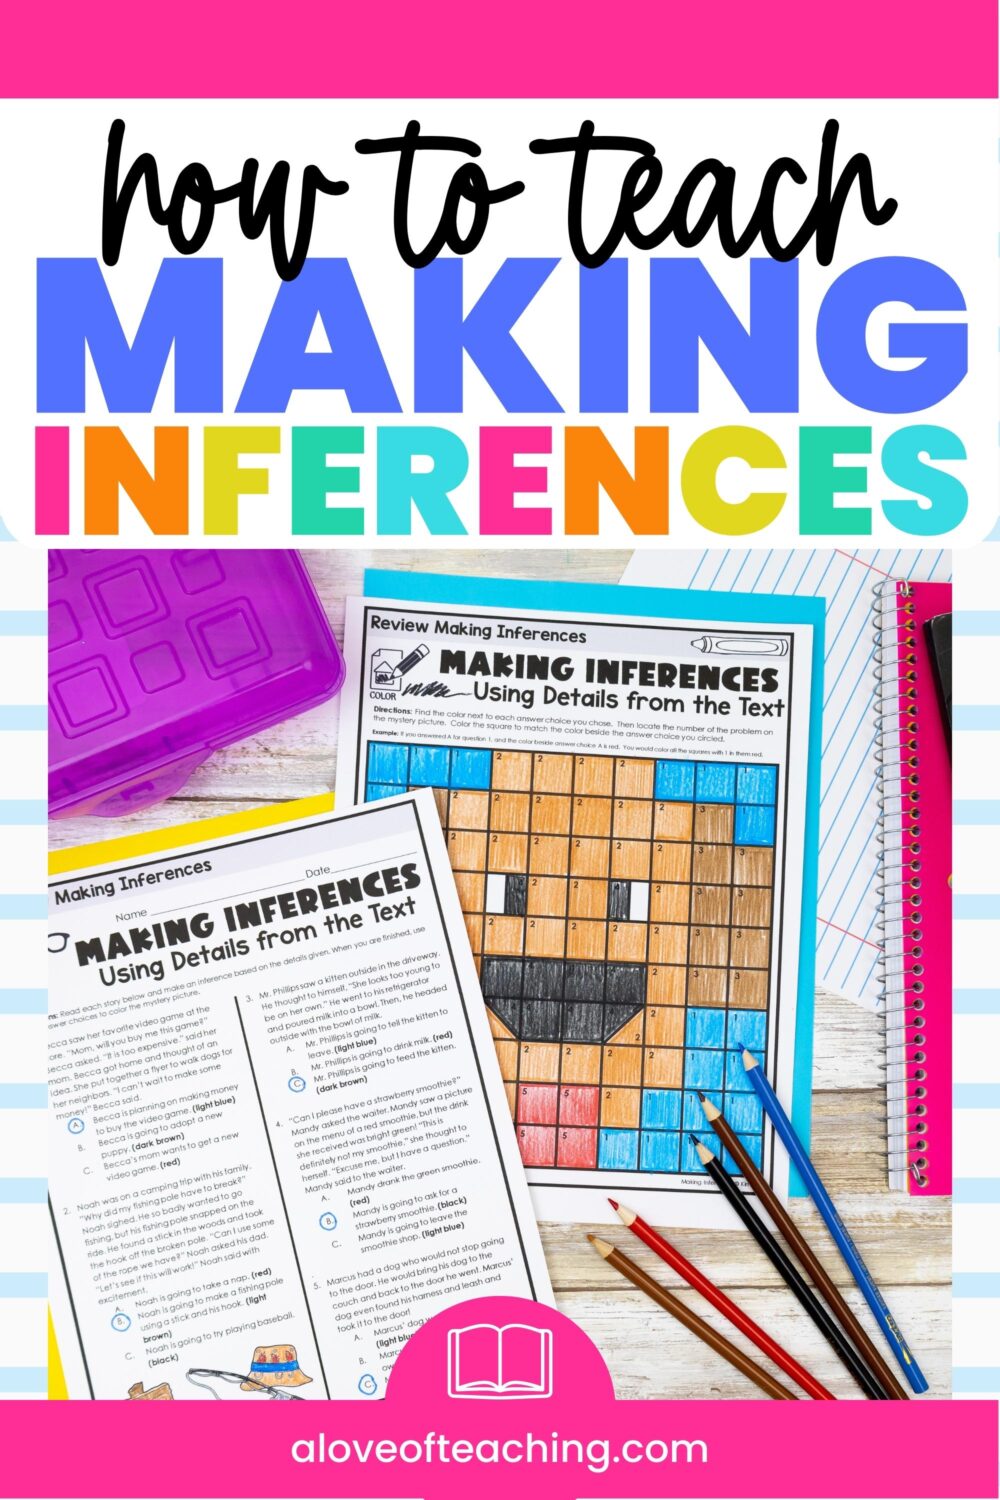 This is a title graphic for a blog post with the title "How to Teach Making Inferences" across the top and a photograph of activity pages for making inferences below the title.